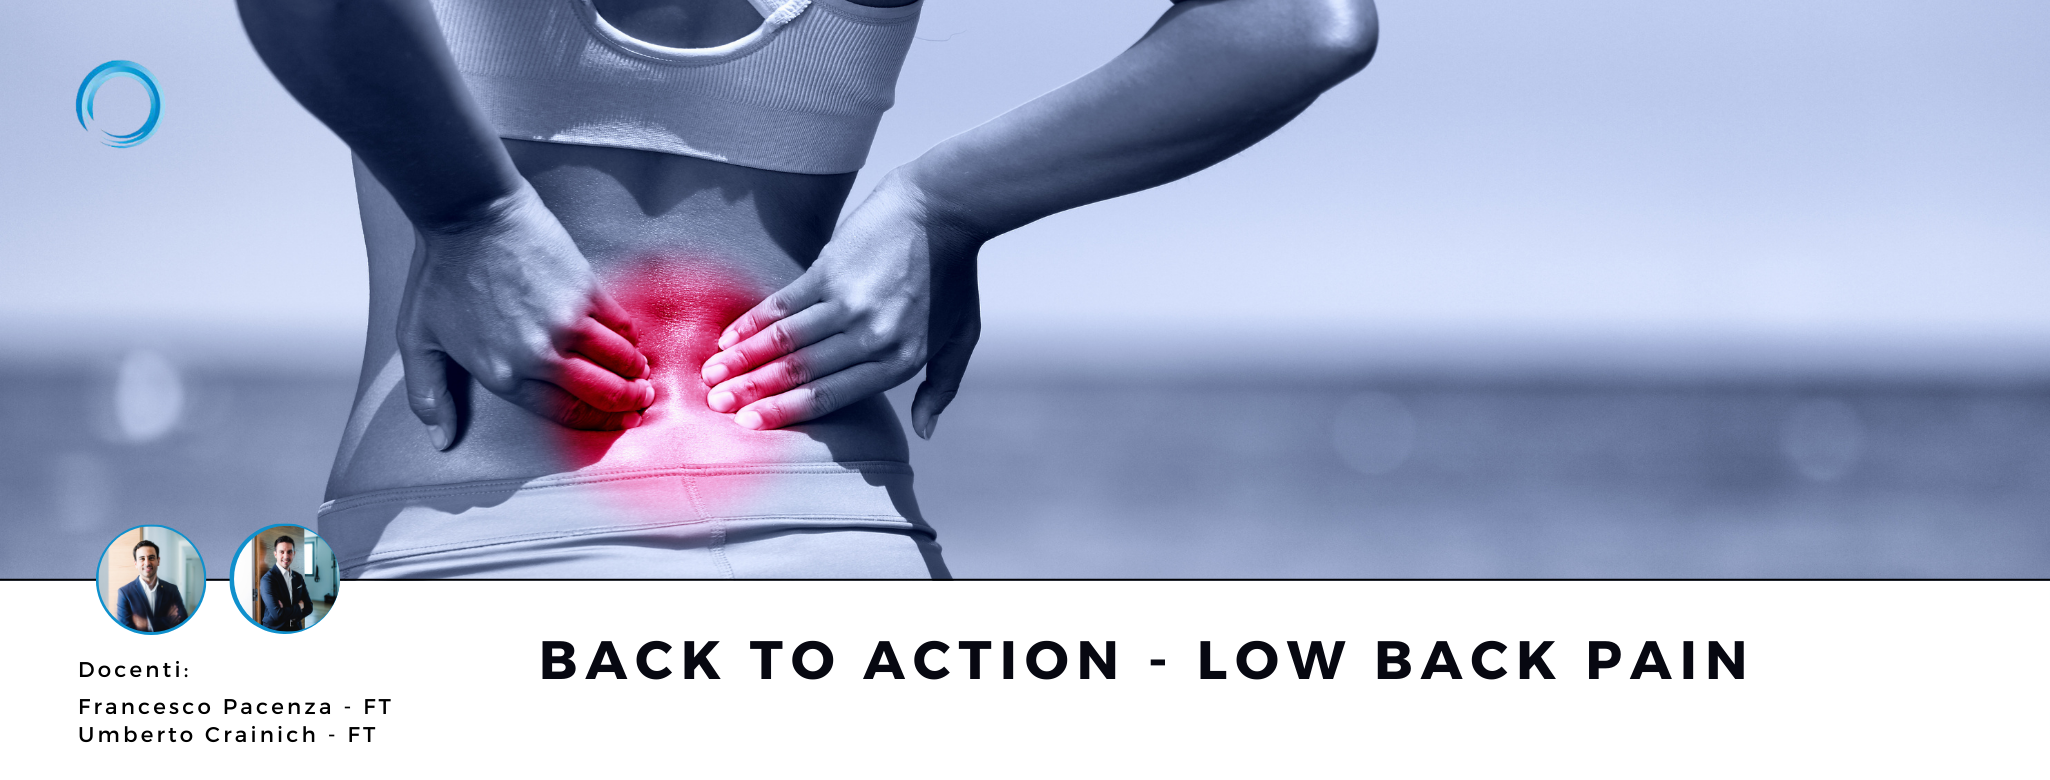 BACK TO ACTION - LOW BACK PAIN